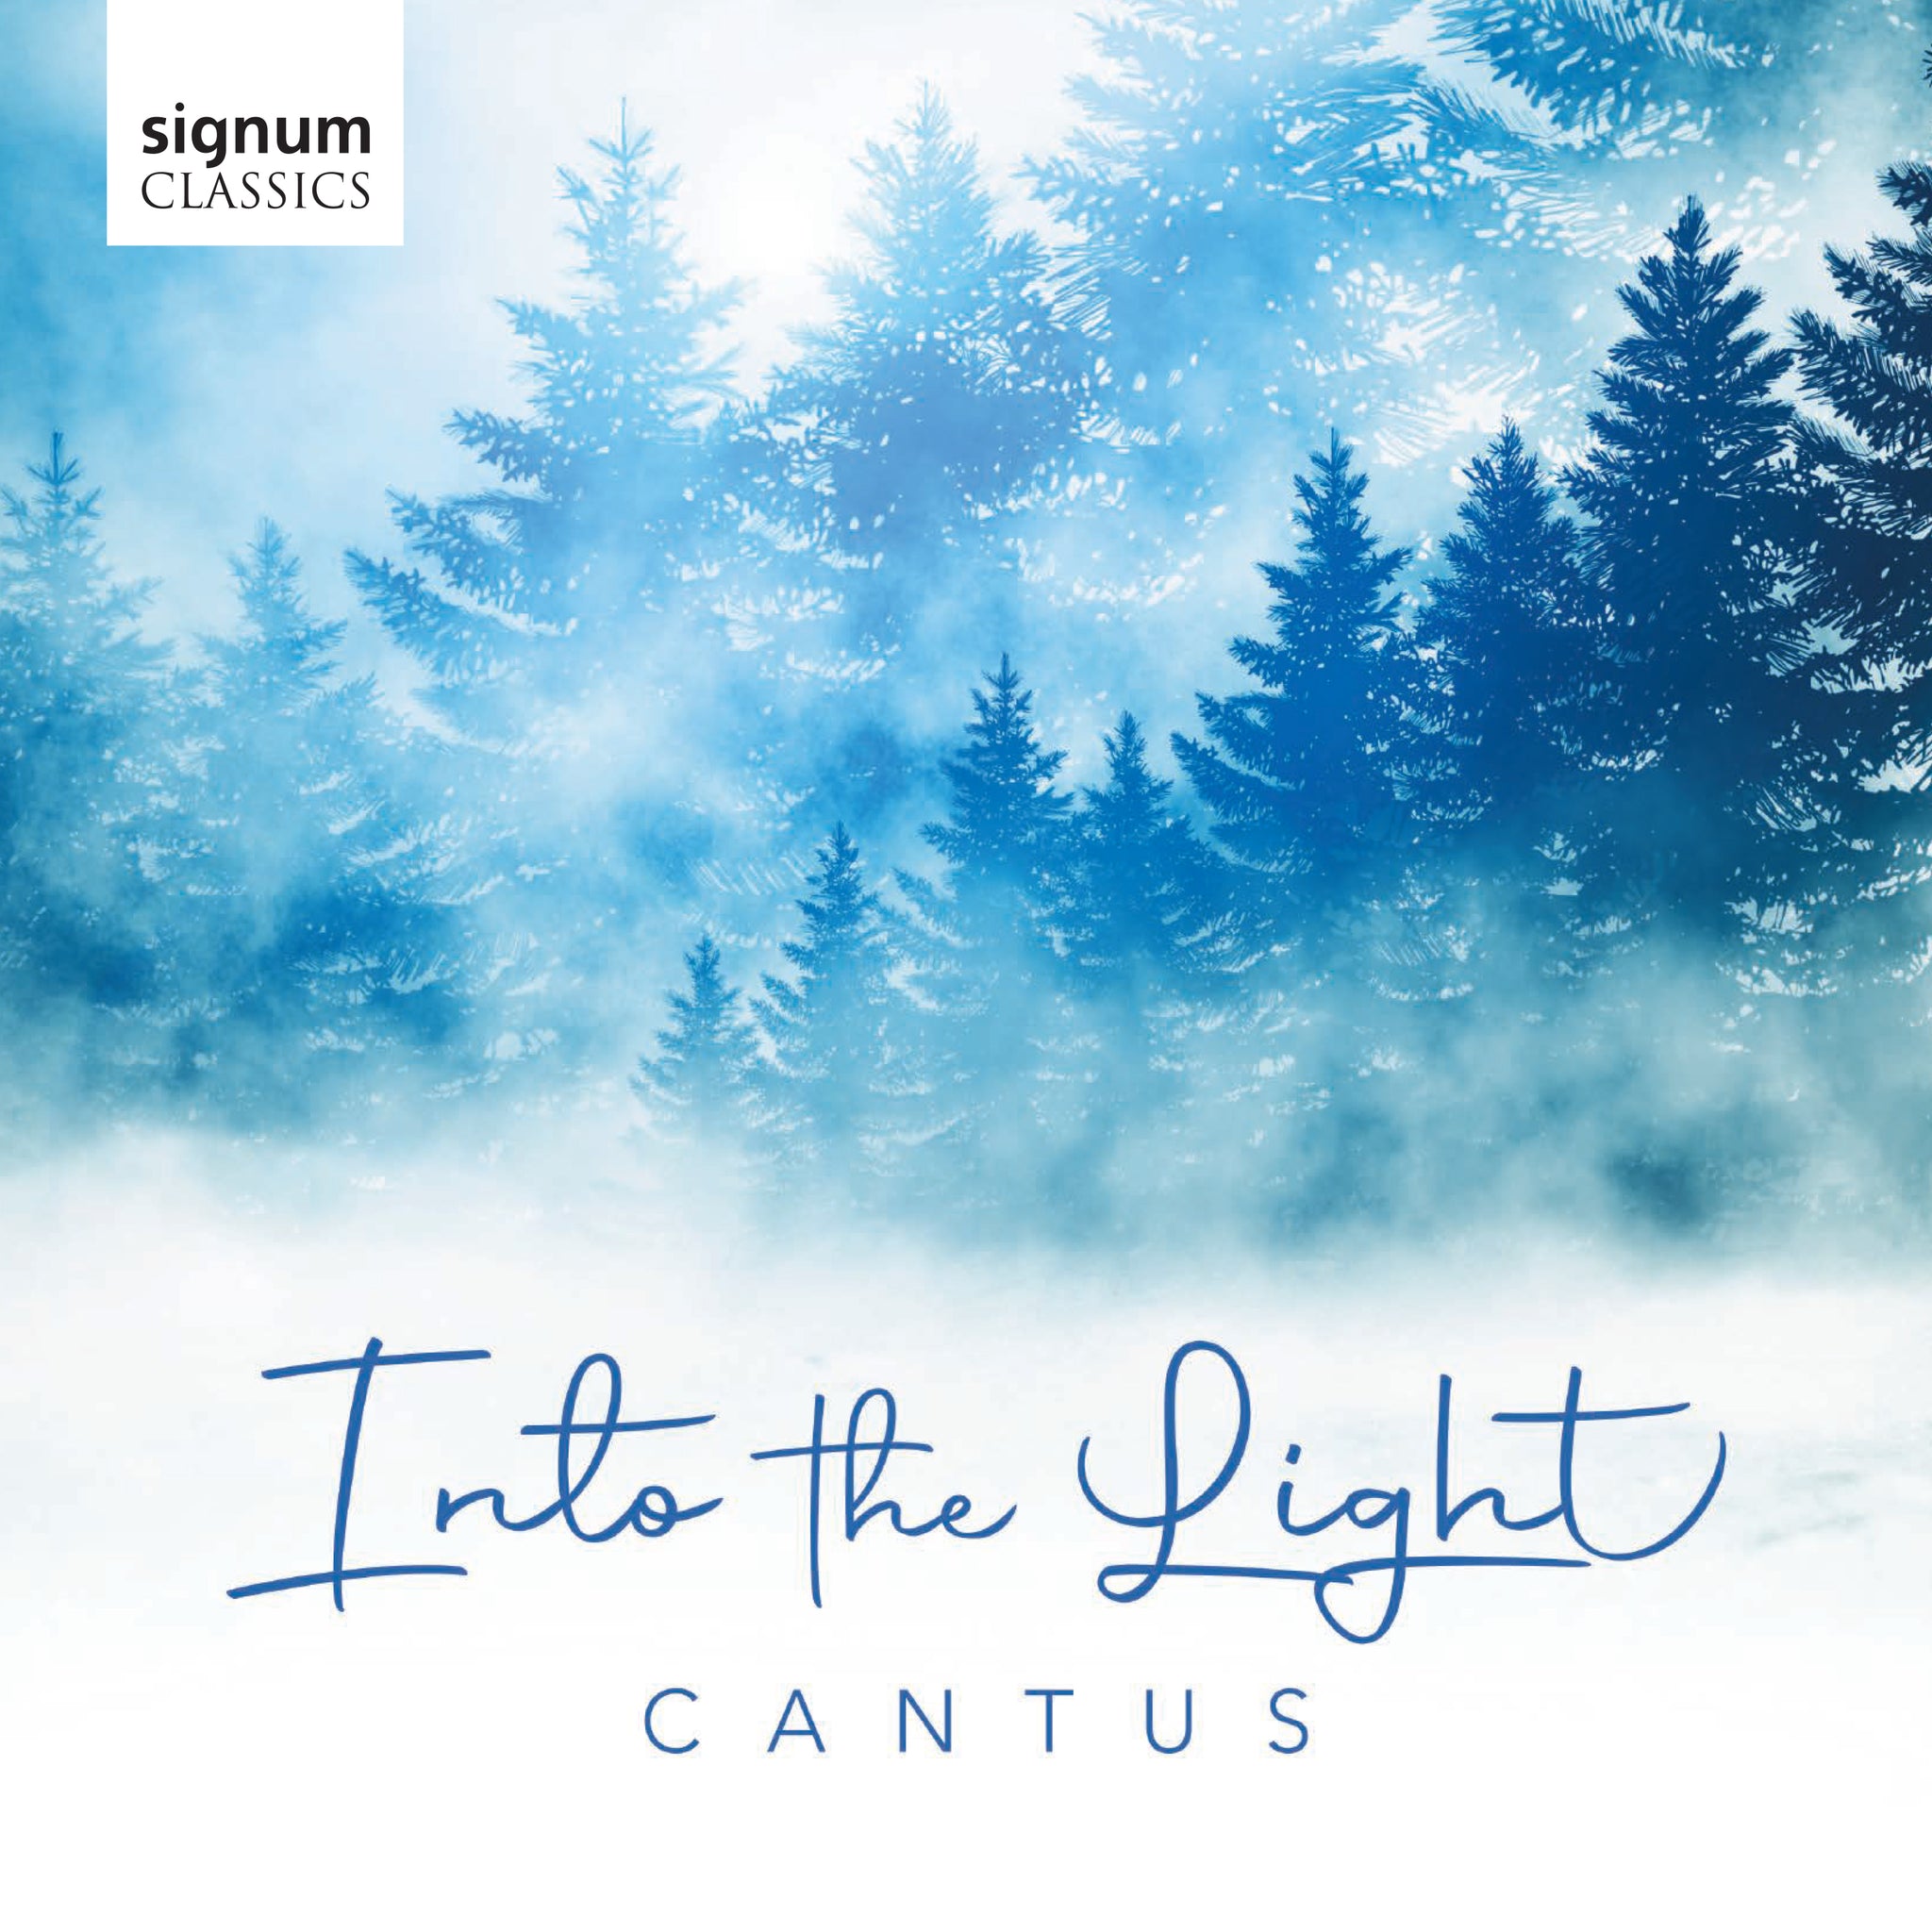 Into The Light: Christmas Music for Low Voices / Cantus